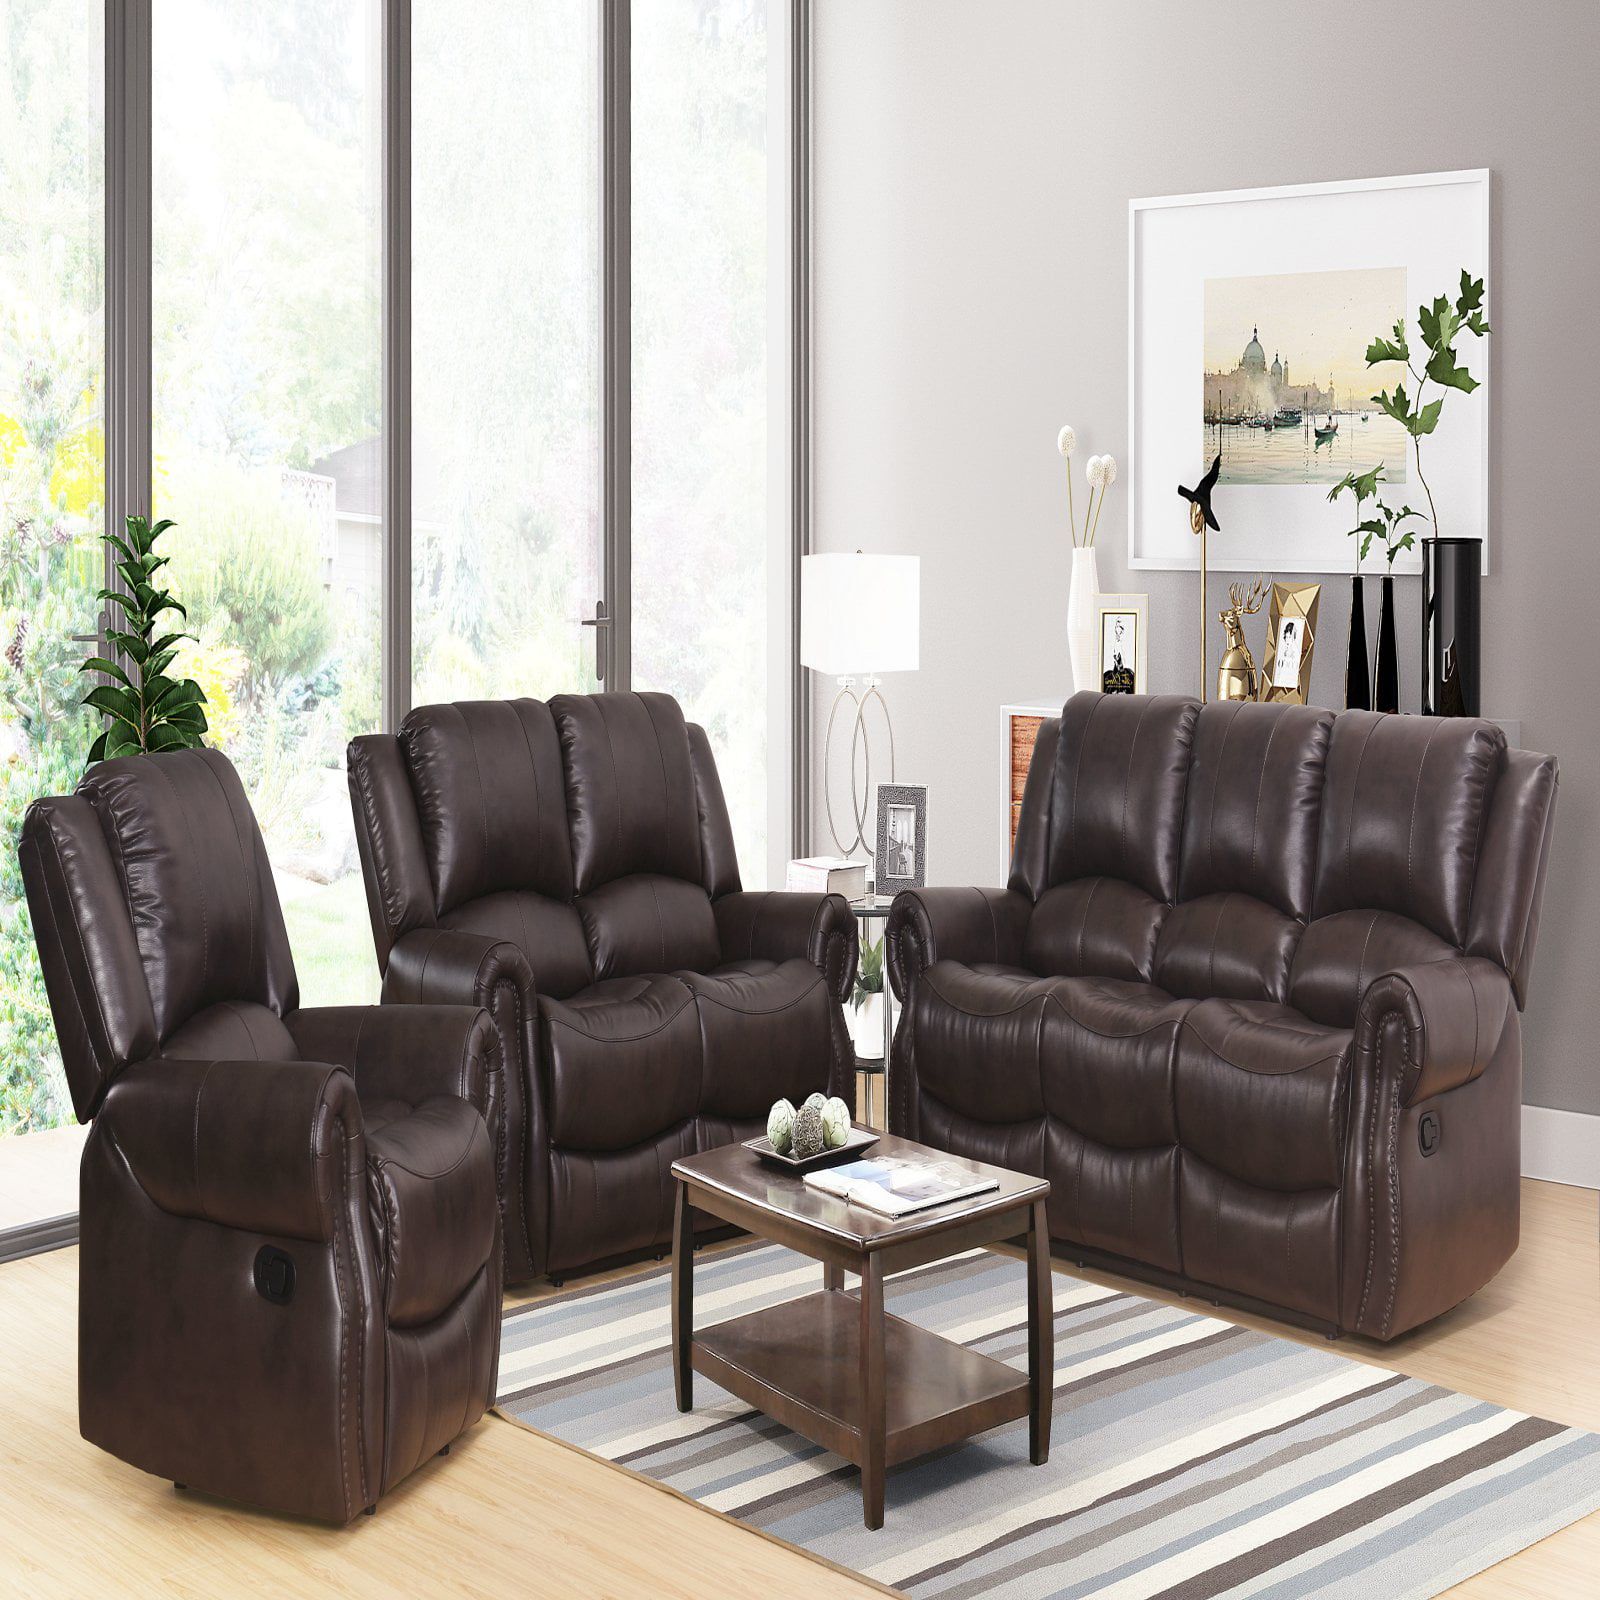 Abbyson Living Toya 3 Piece Faux Leather Reclining Sofa Set – Walmart Throughout Faux Leather Sofas (View 7 of 21)